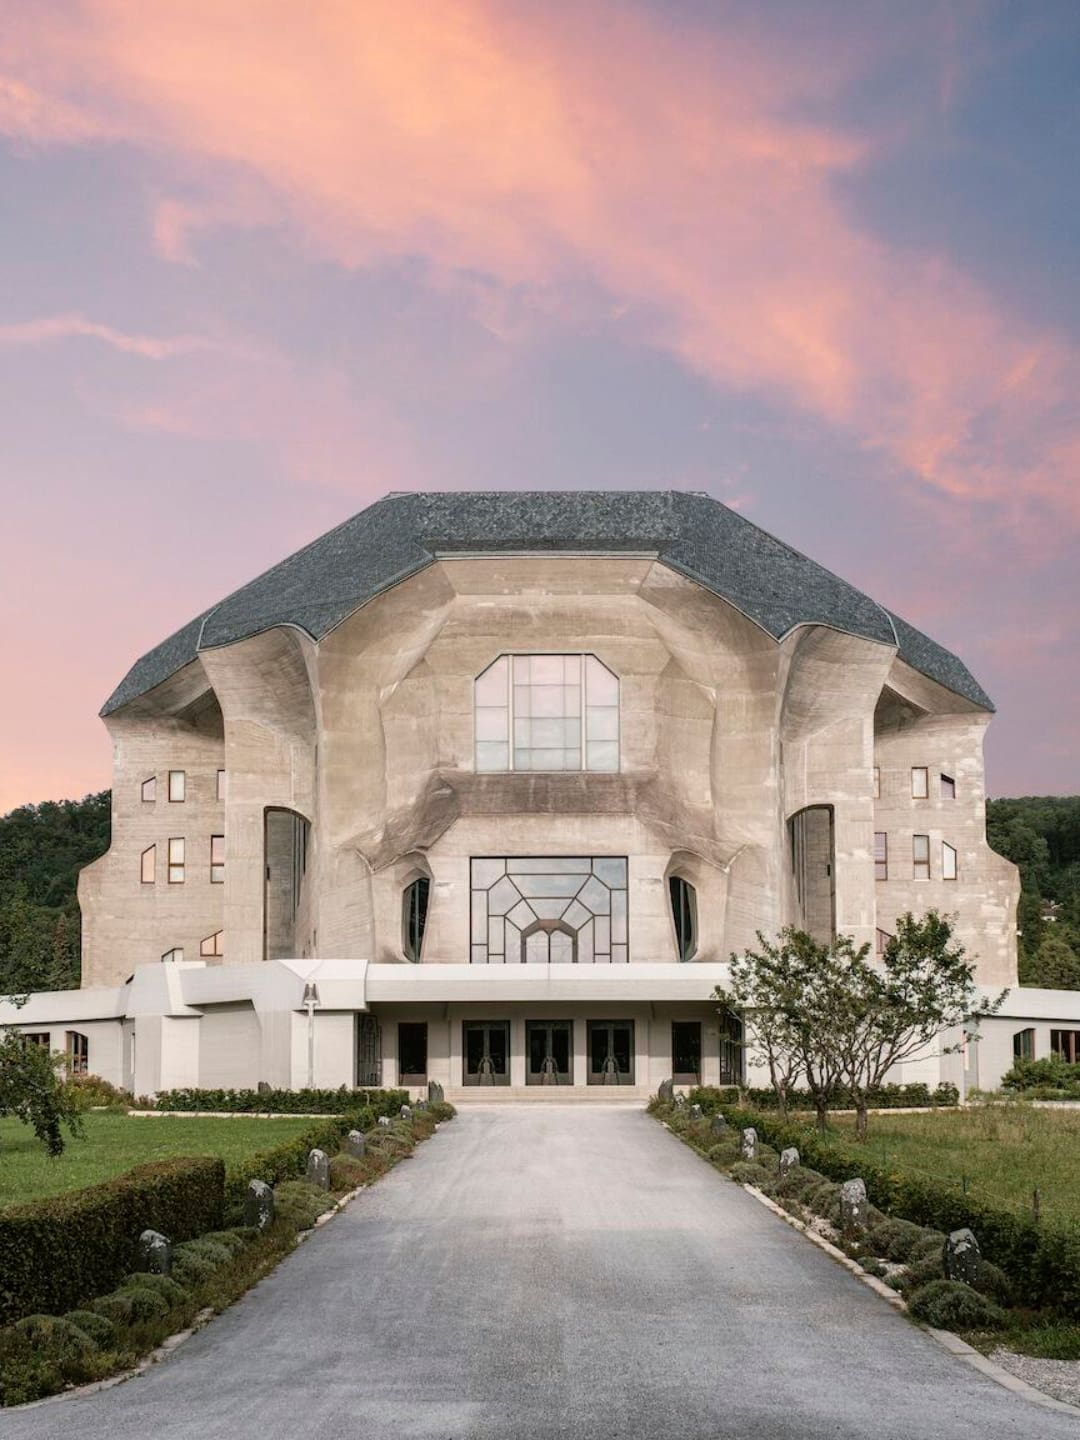 The most beautiful art and design destinations in Europe | The Goetheanum in Dornach, designed by Rudolph Steiner and completed in 1928